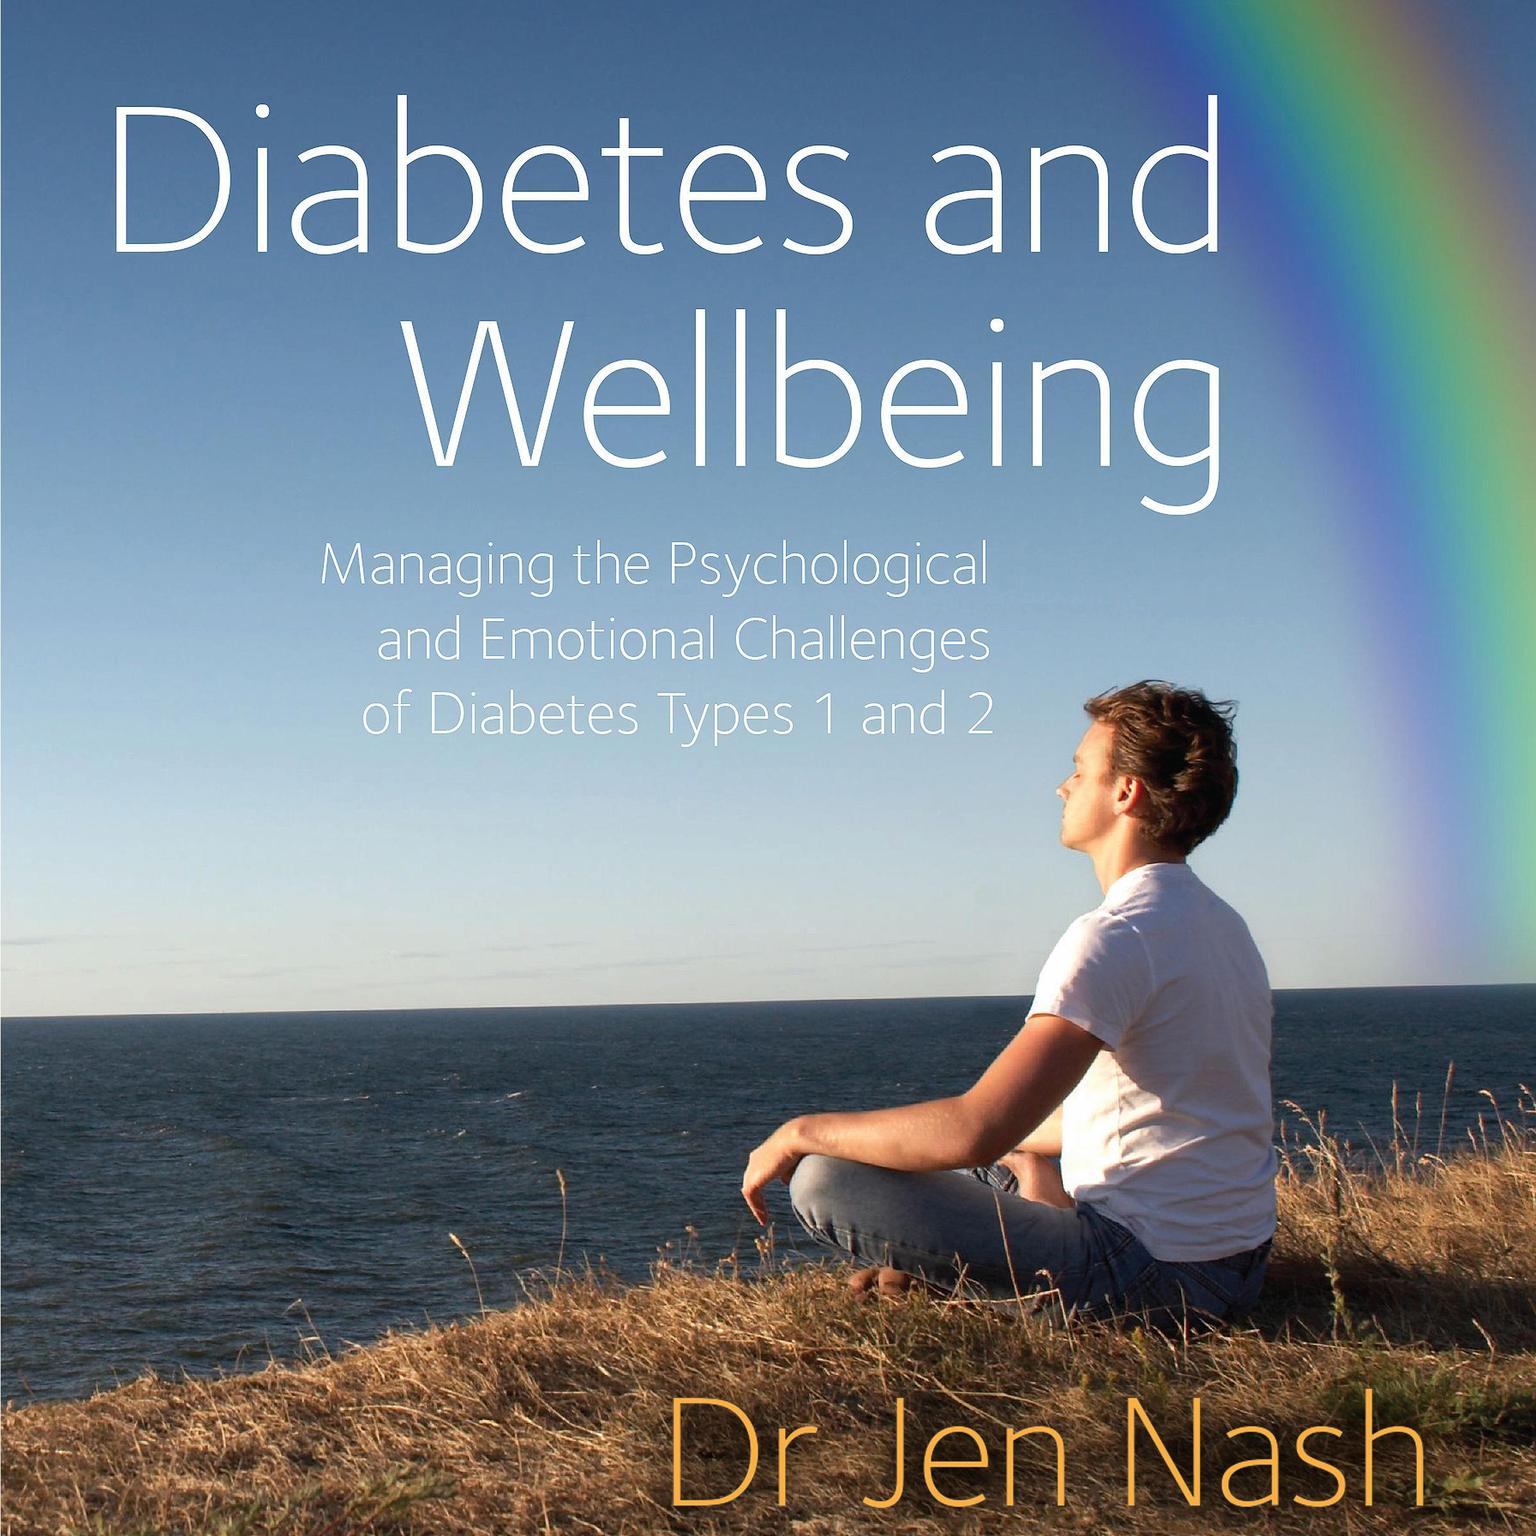 Diabetes and Wellbeing: Managing the Psychological and Emotional Challenges of Diabetes Types 1 and 2 Audiobook, by Jen Nash